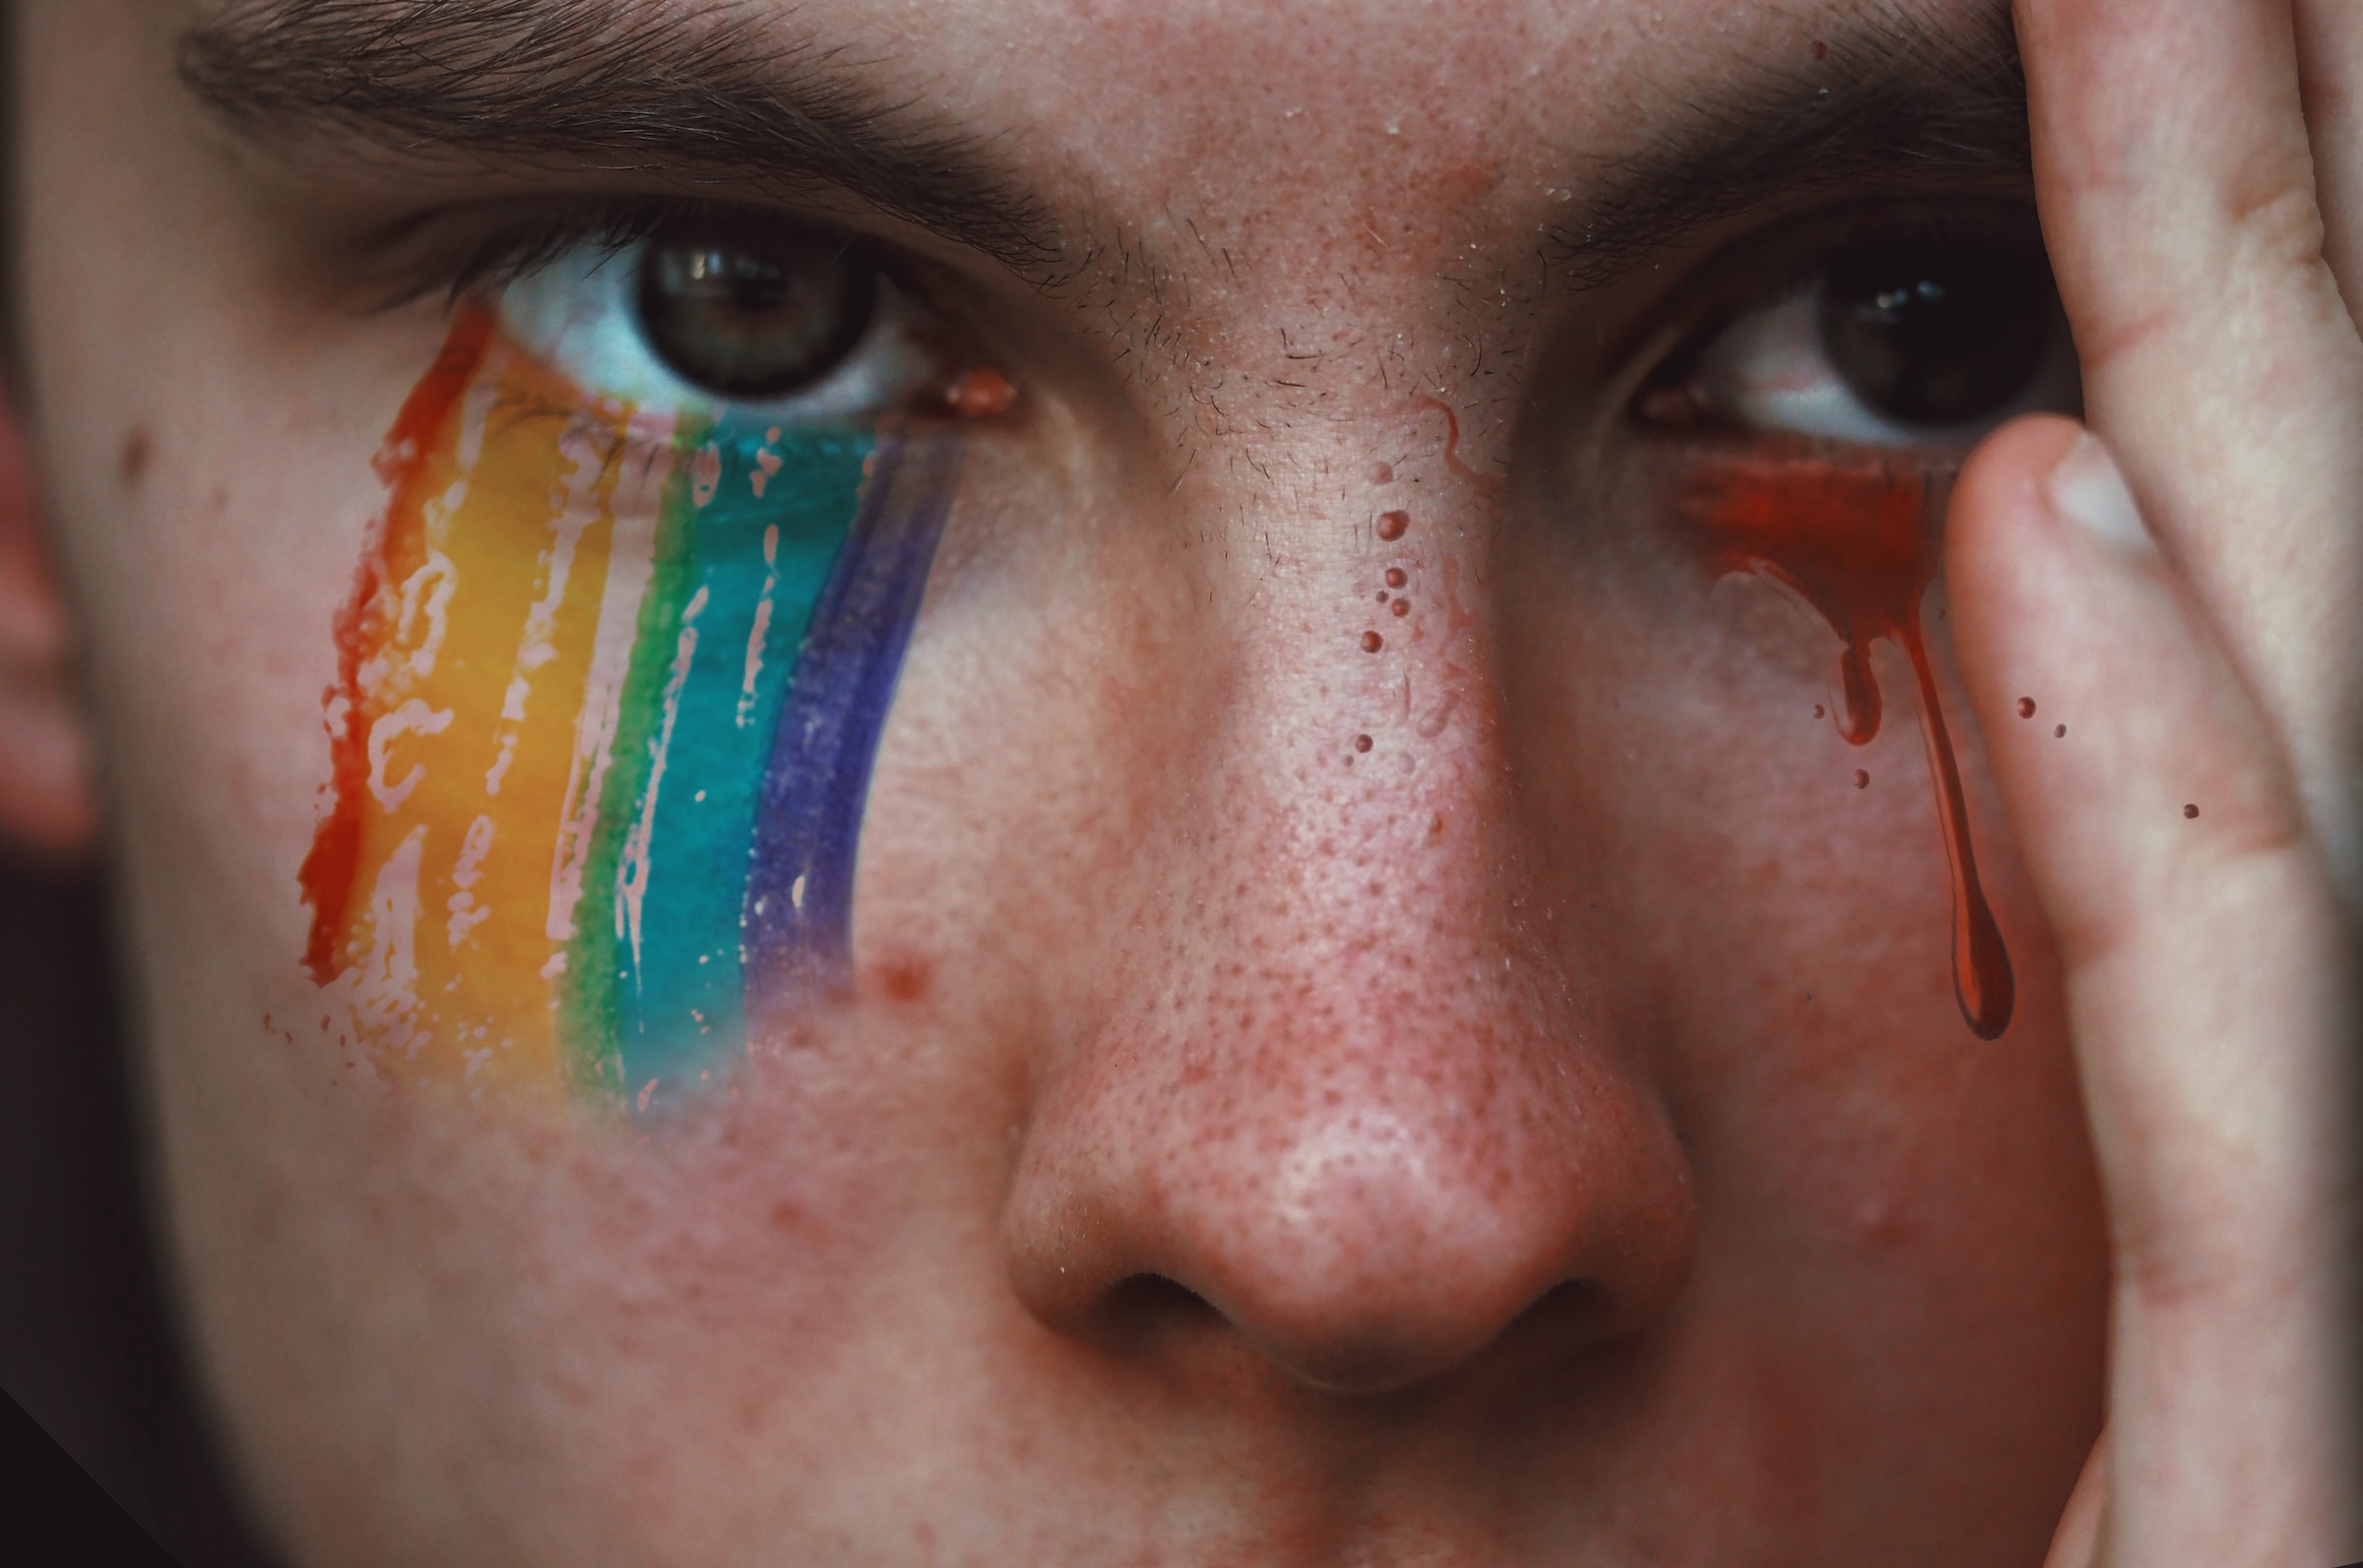 Close up of the face of a person, we see just their eyes and nose, with their hand shielding part of their face. A graphical overlay places rainbow-coloured mascara under one eye and blood droplets under the other. Posed by model.